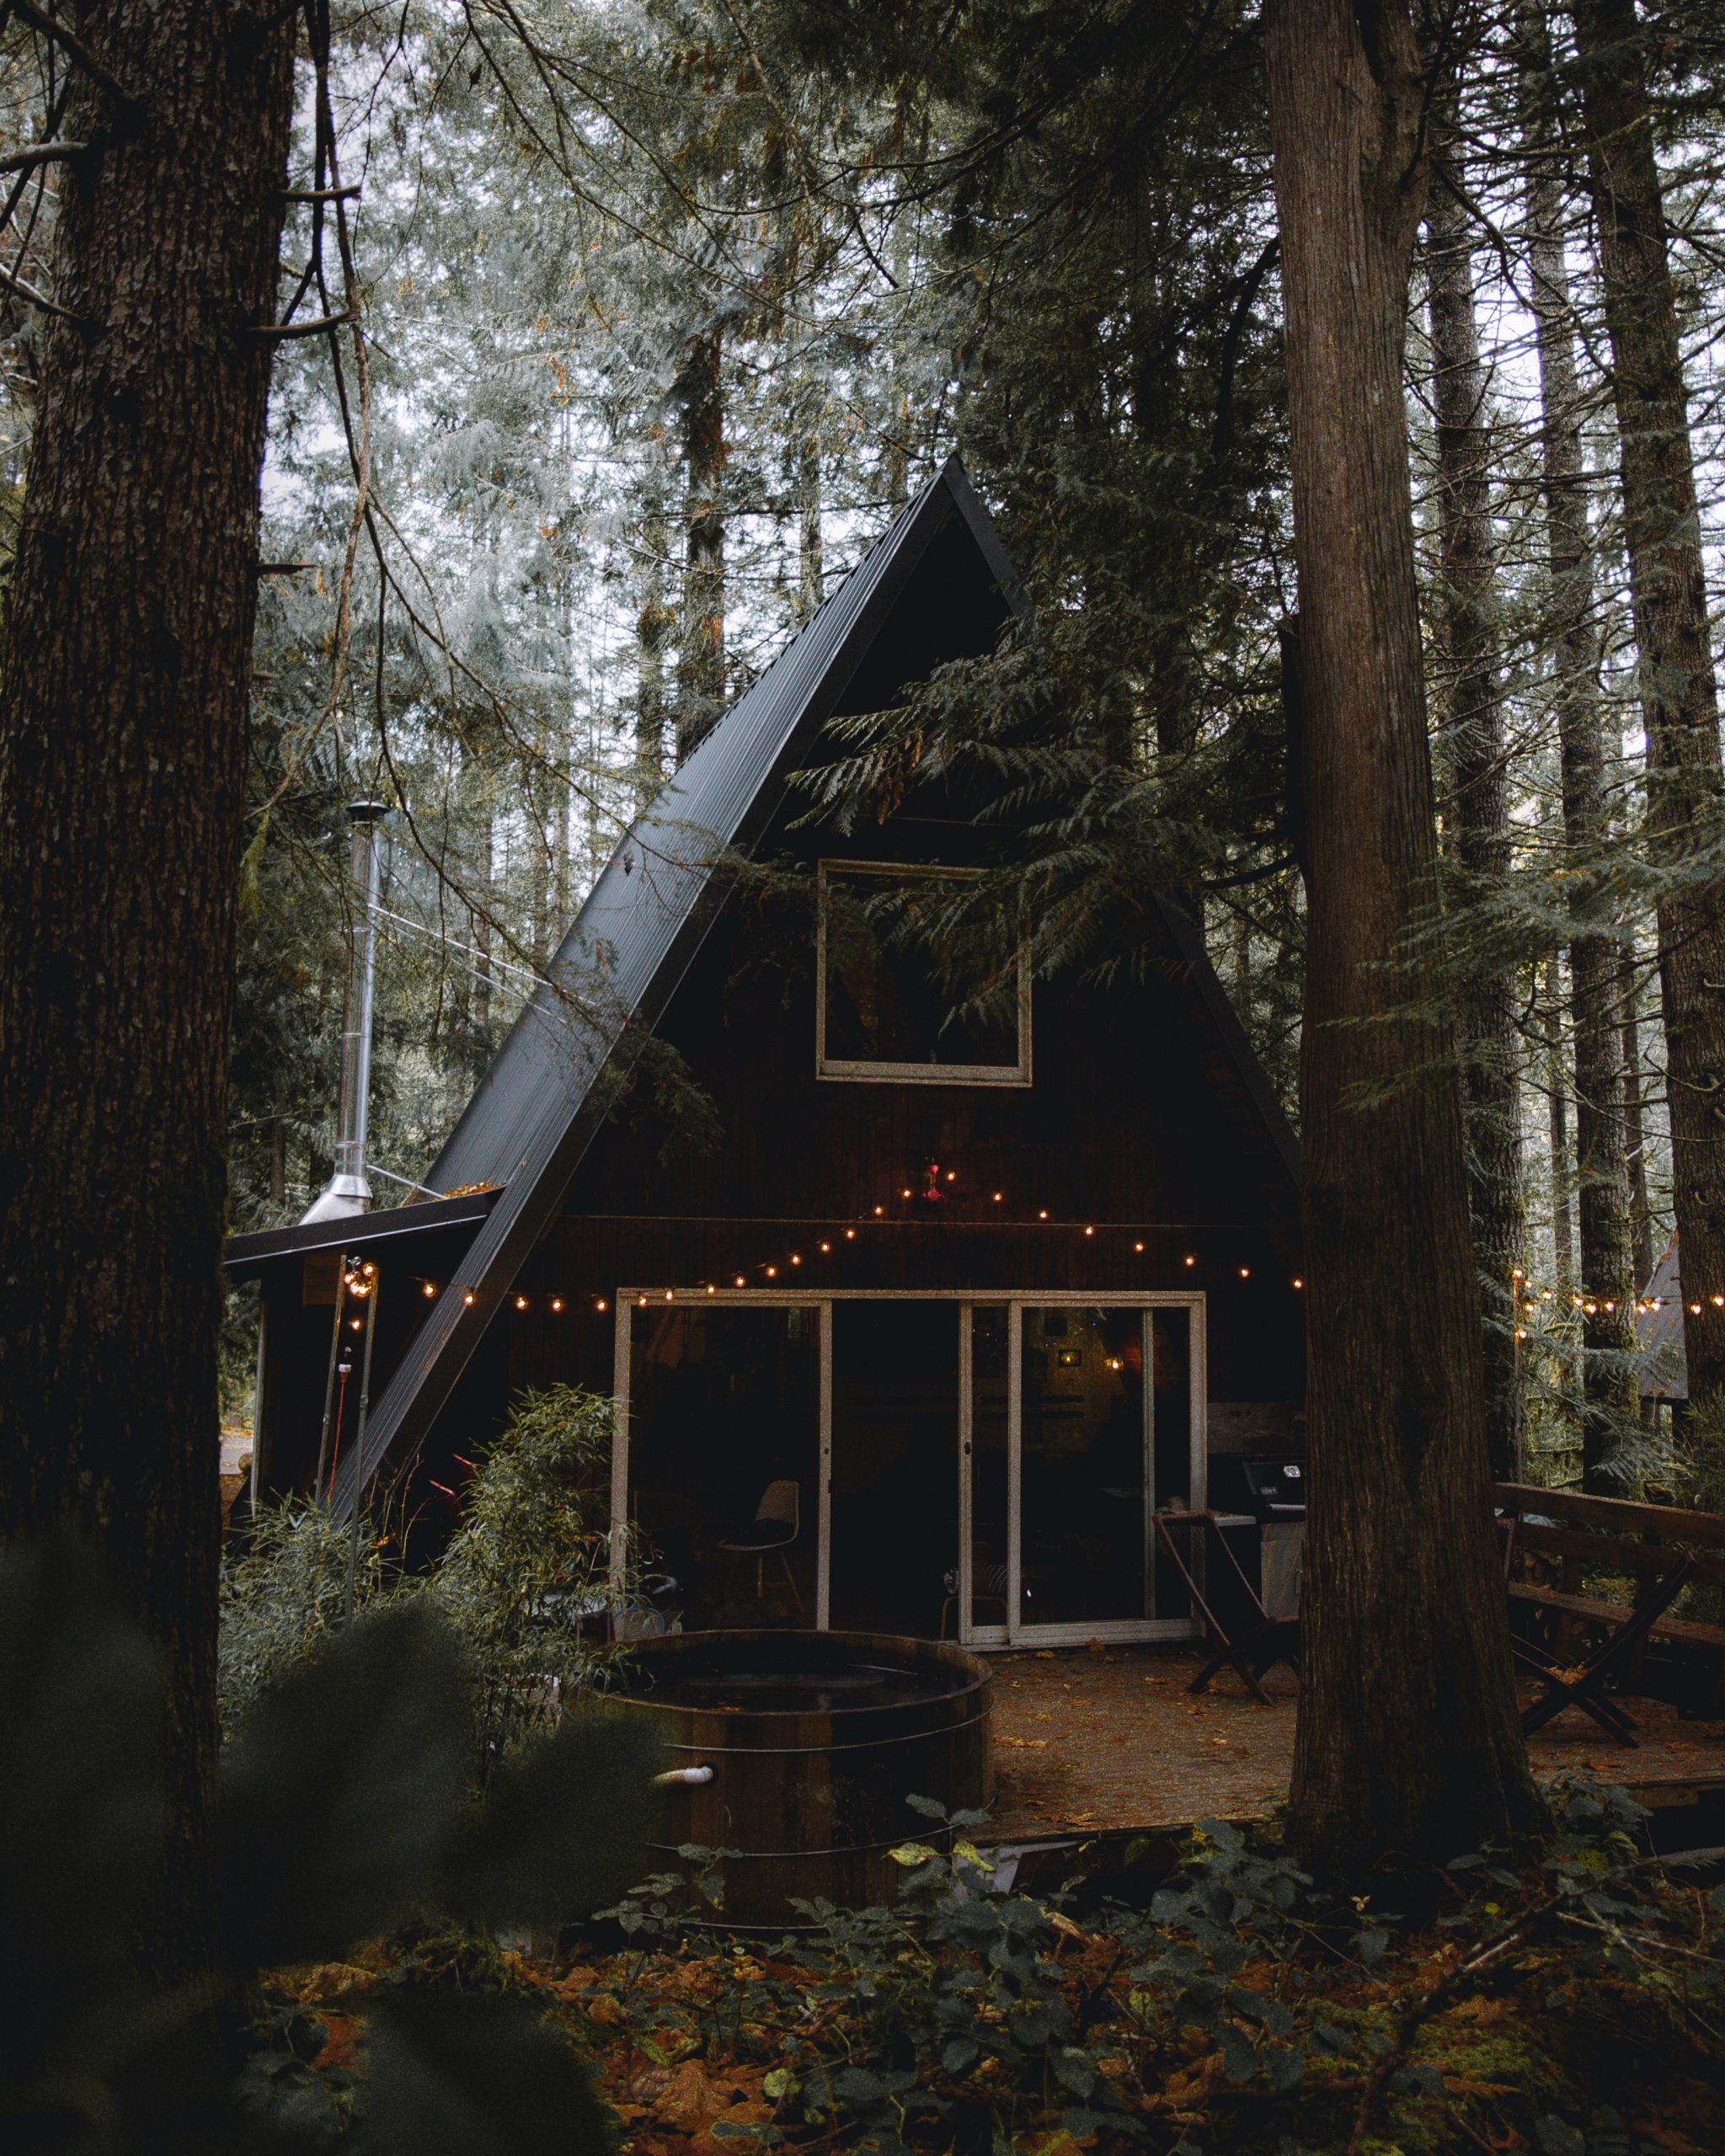 Triangular Eco cabin in the forest for a post on Greenwashing